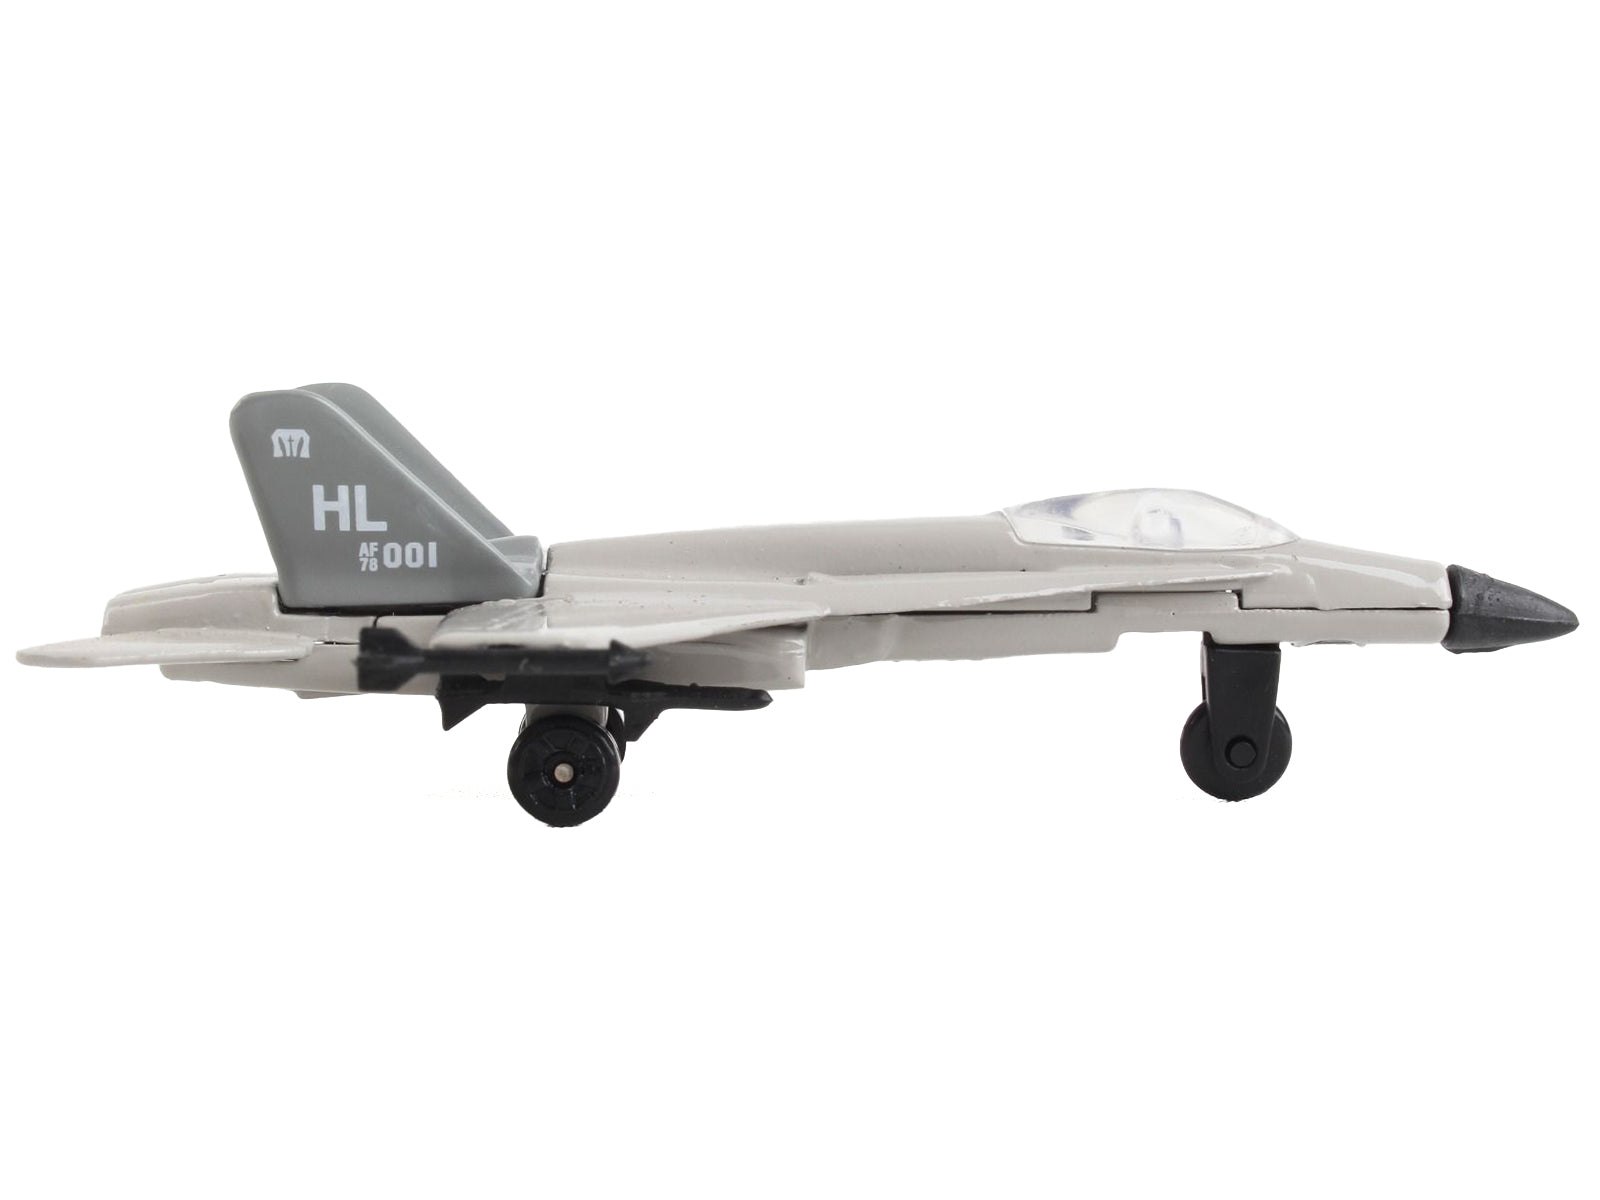 McDonnell Douglas F/A-18C Hornet Fighter Aircraft Gray "United States Navy" with Runway Section Diecast Model Airplane by Runway24